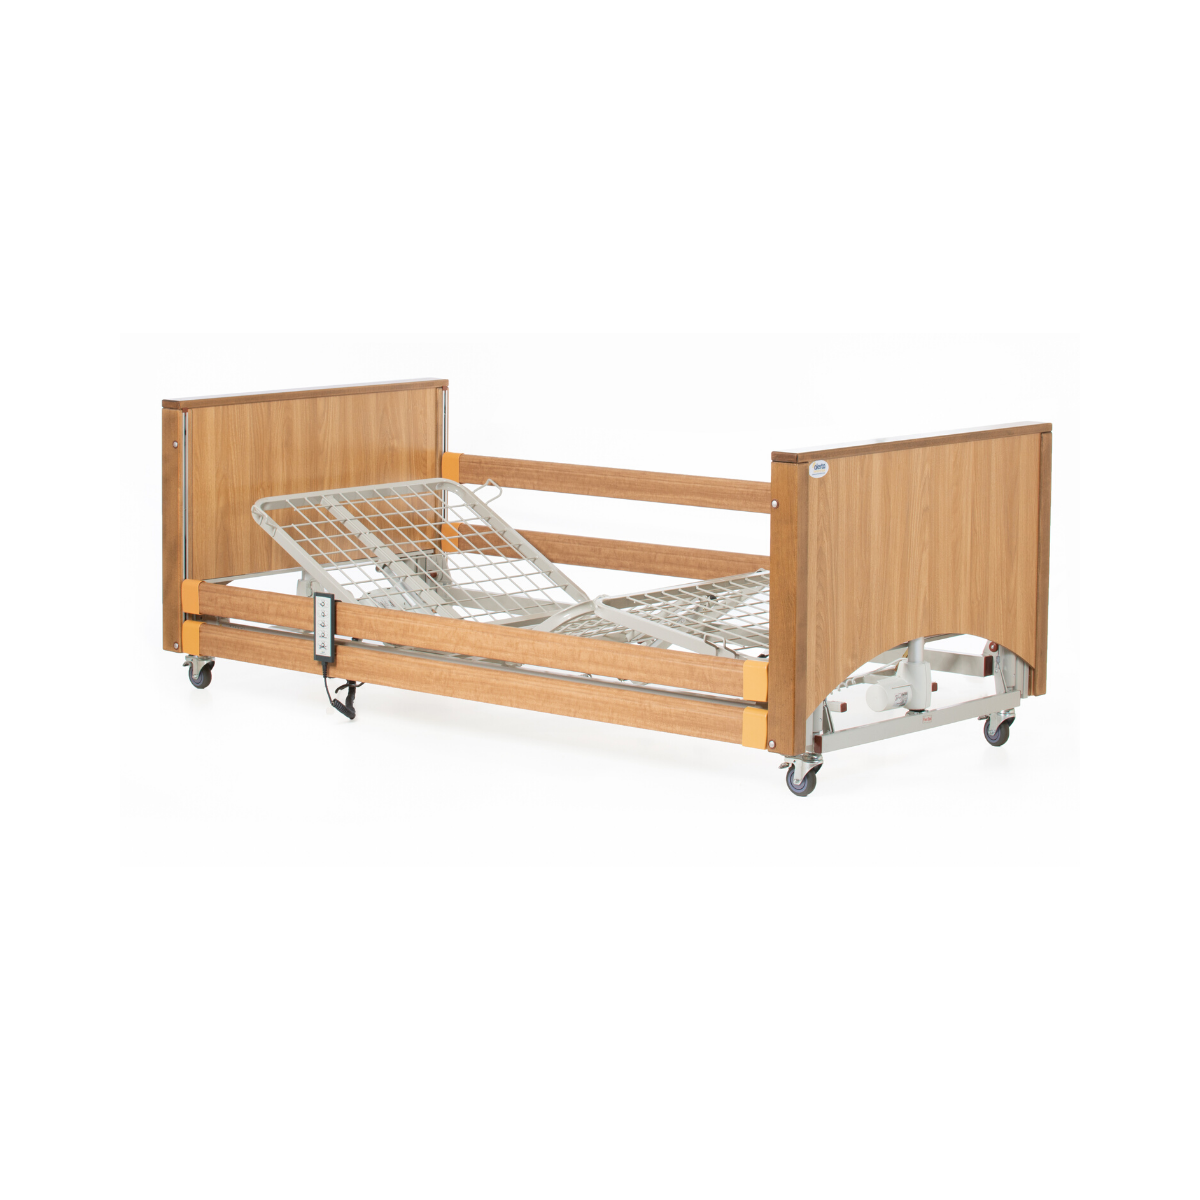 https://www.alertamedical.com/userfiles/category/5efa44a855009-alerta-medical-profiling-care-beds-over-bed-tables.png